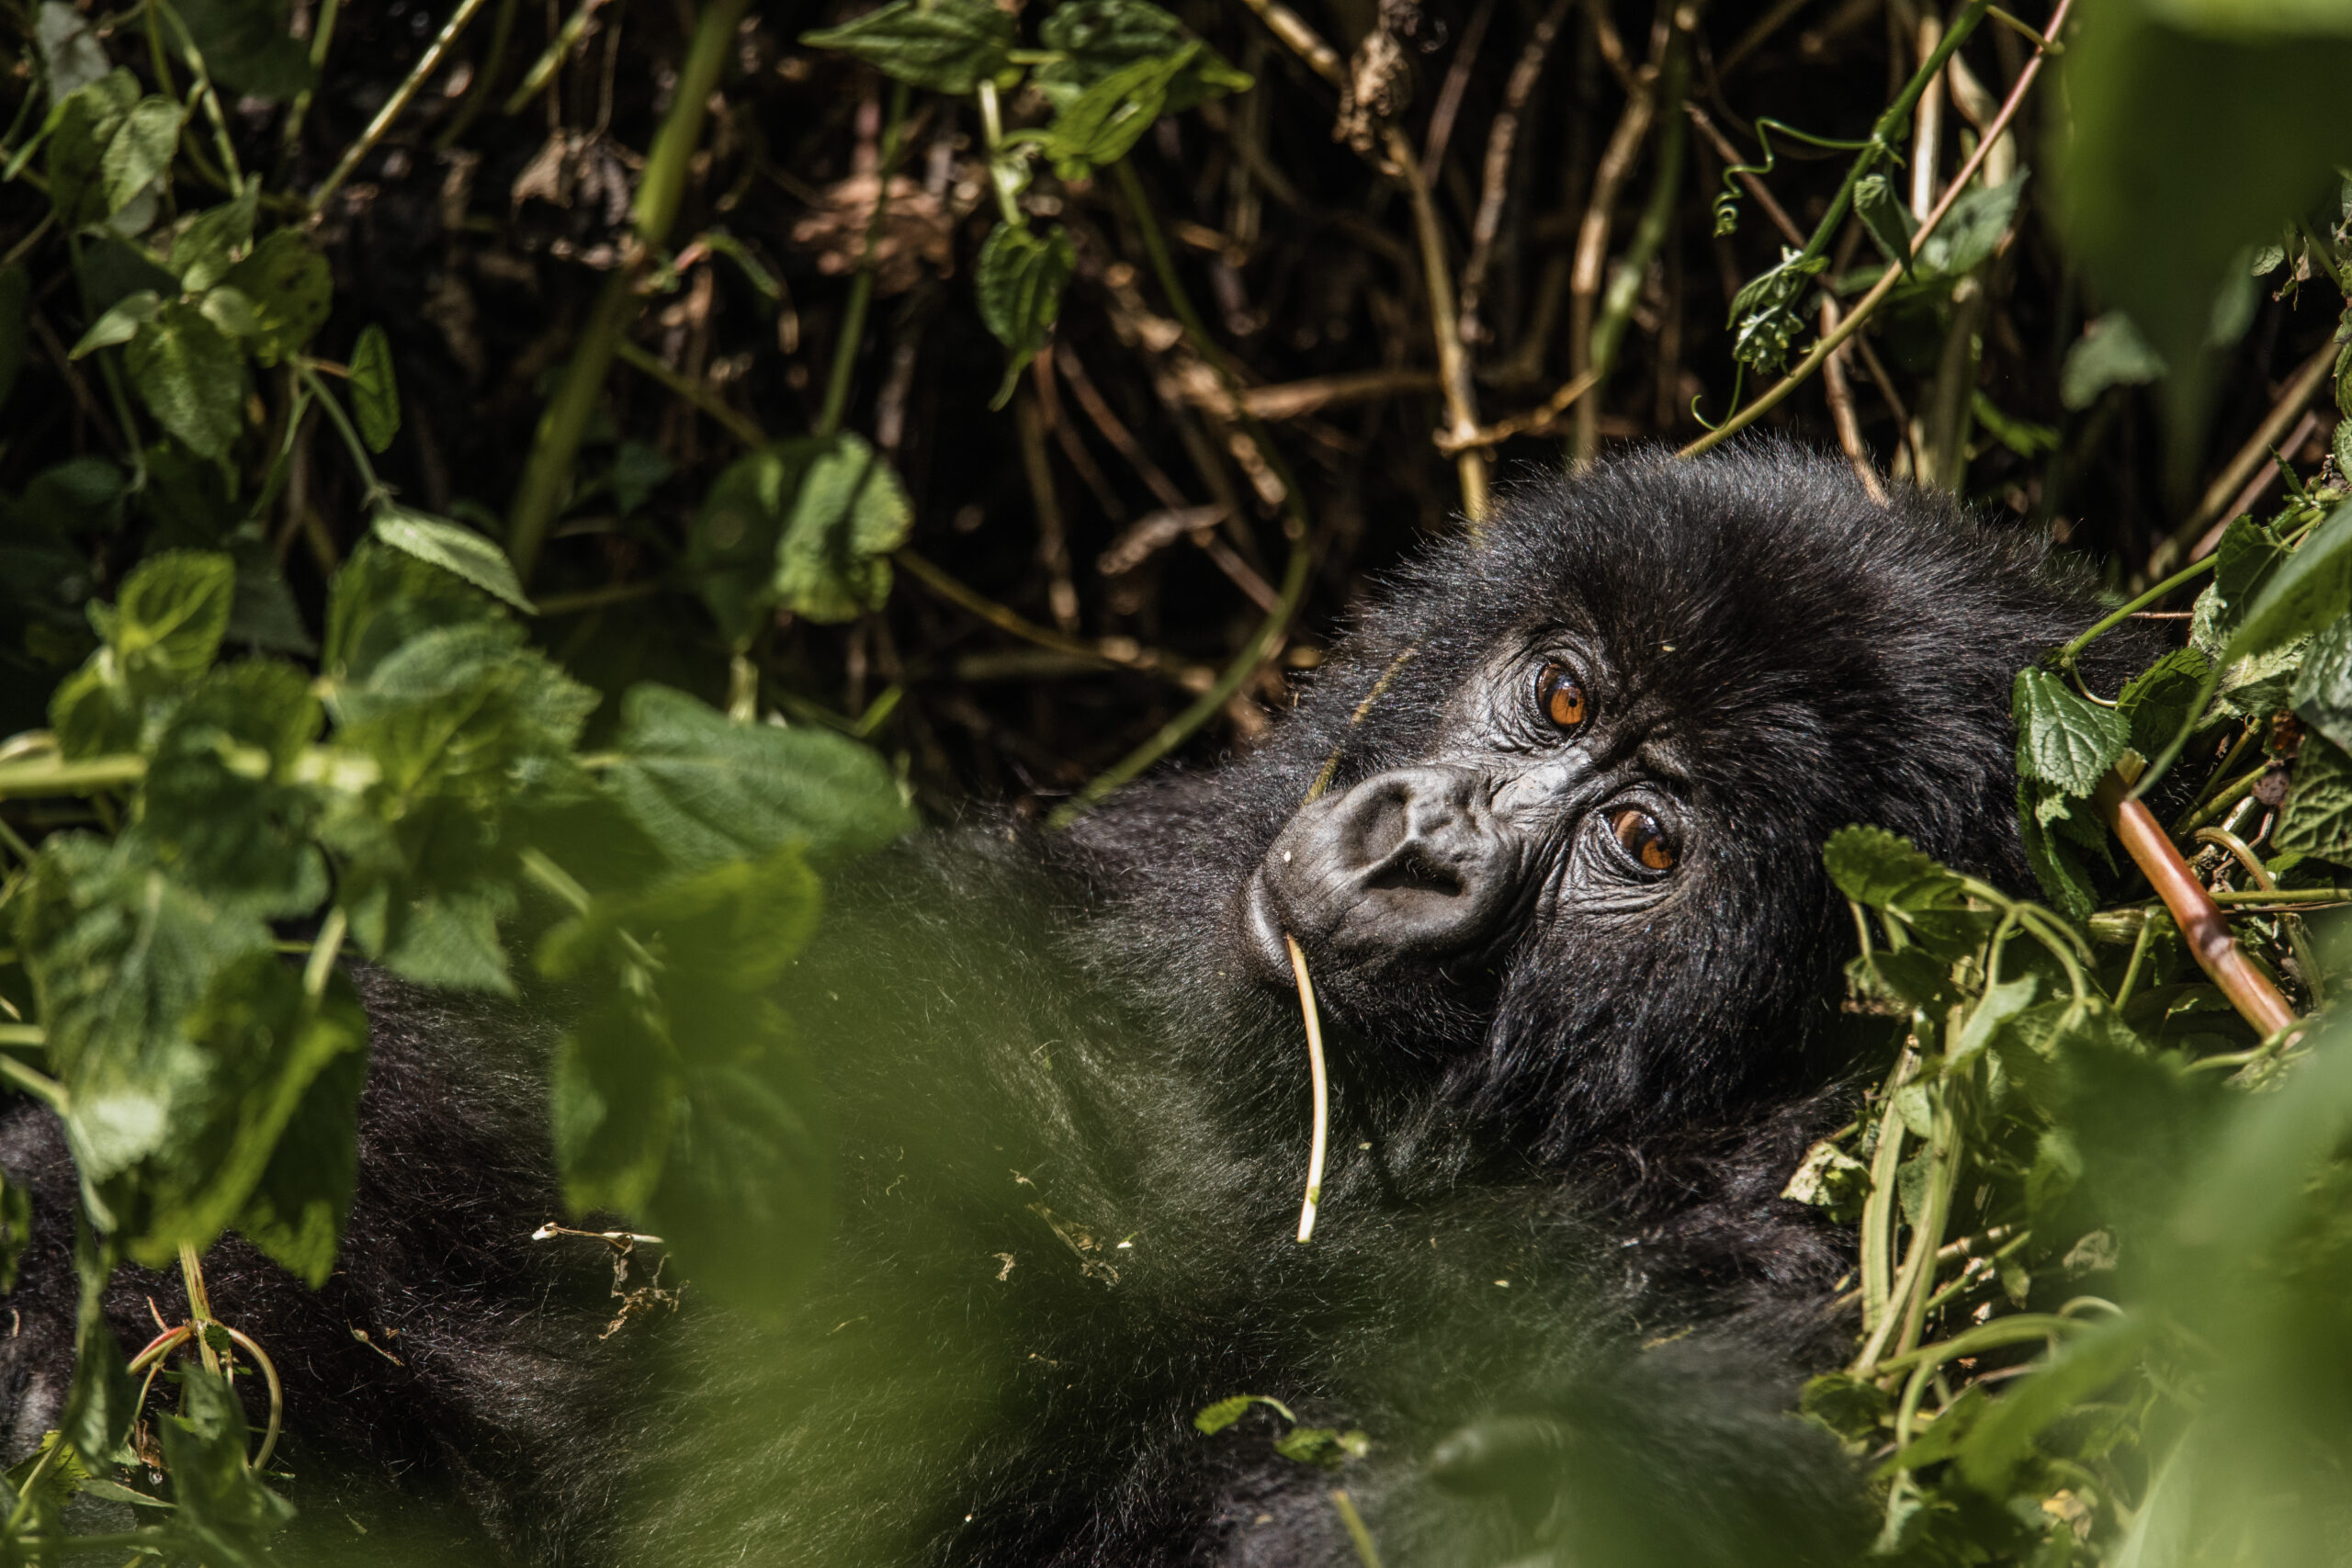 A Mountain Gorilla in Virunga National Park, a Key Biodiversity Area (Photo by Bobby Neptune for Re:wild)